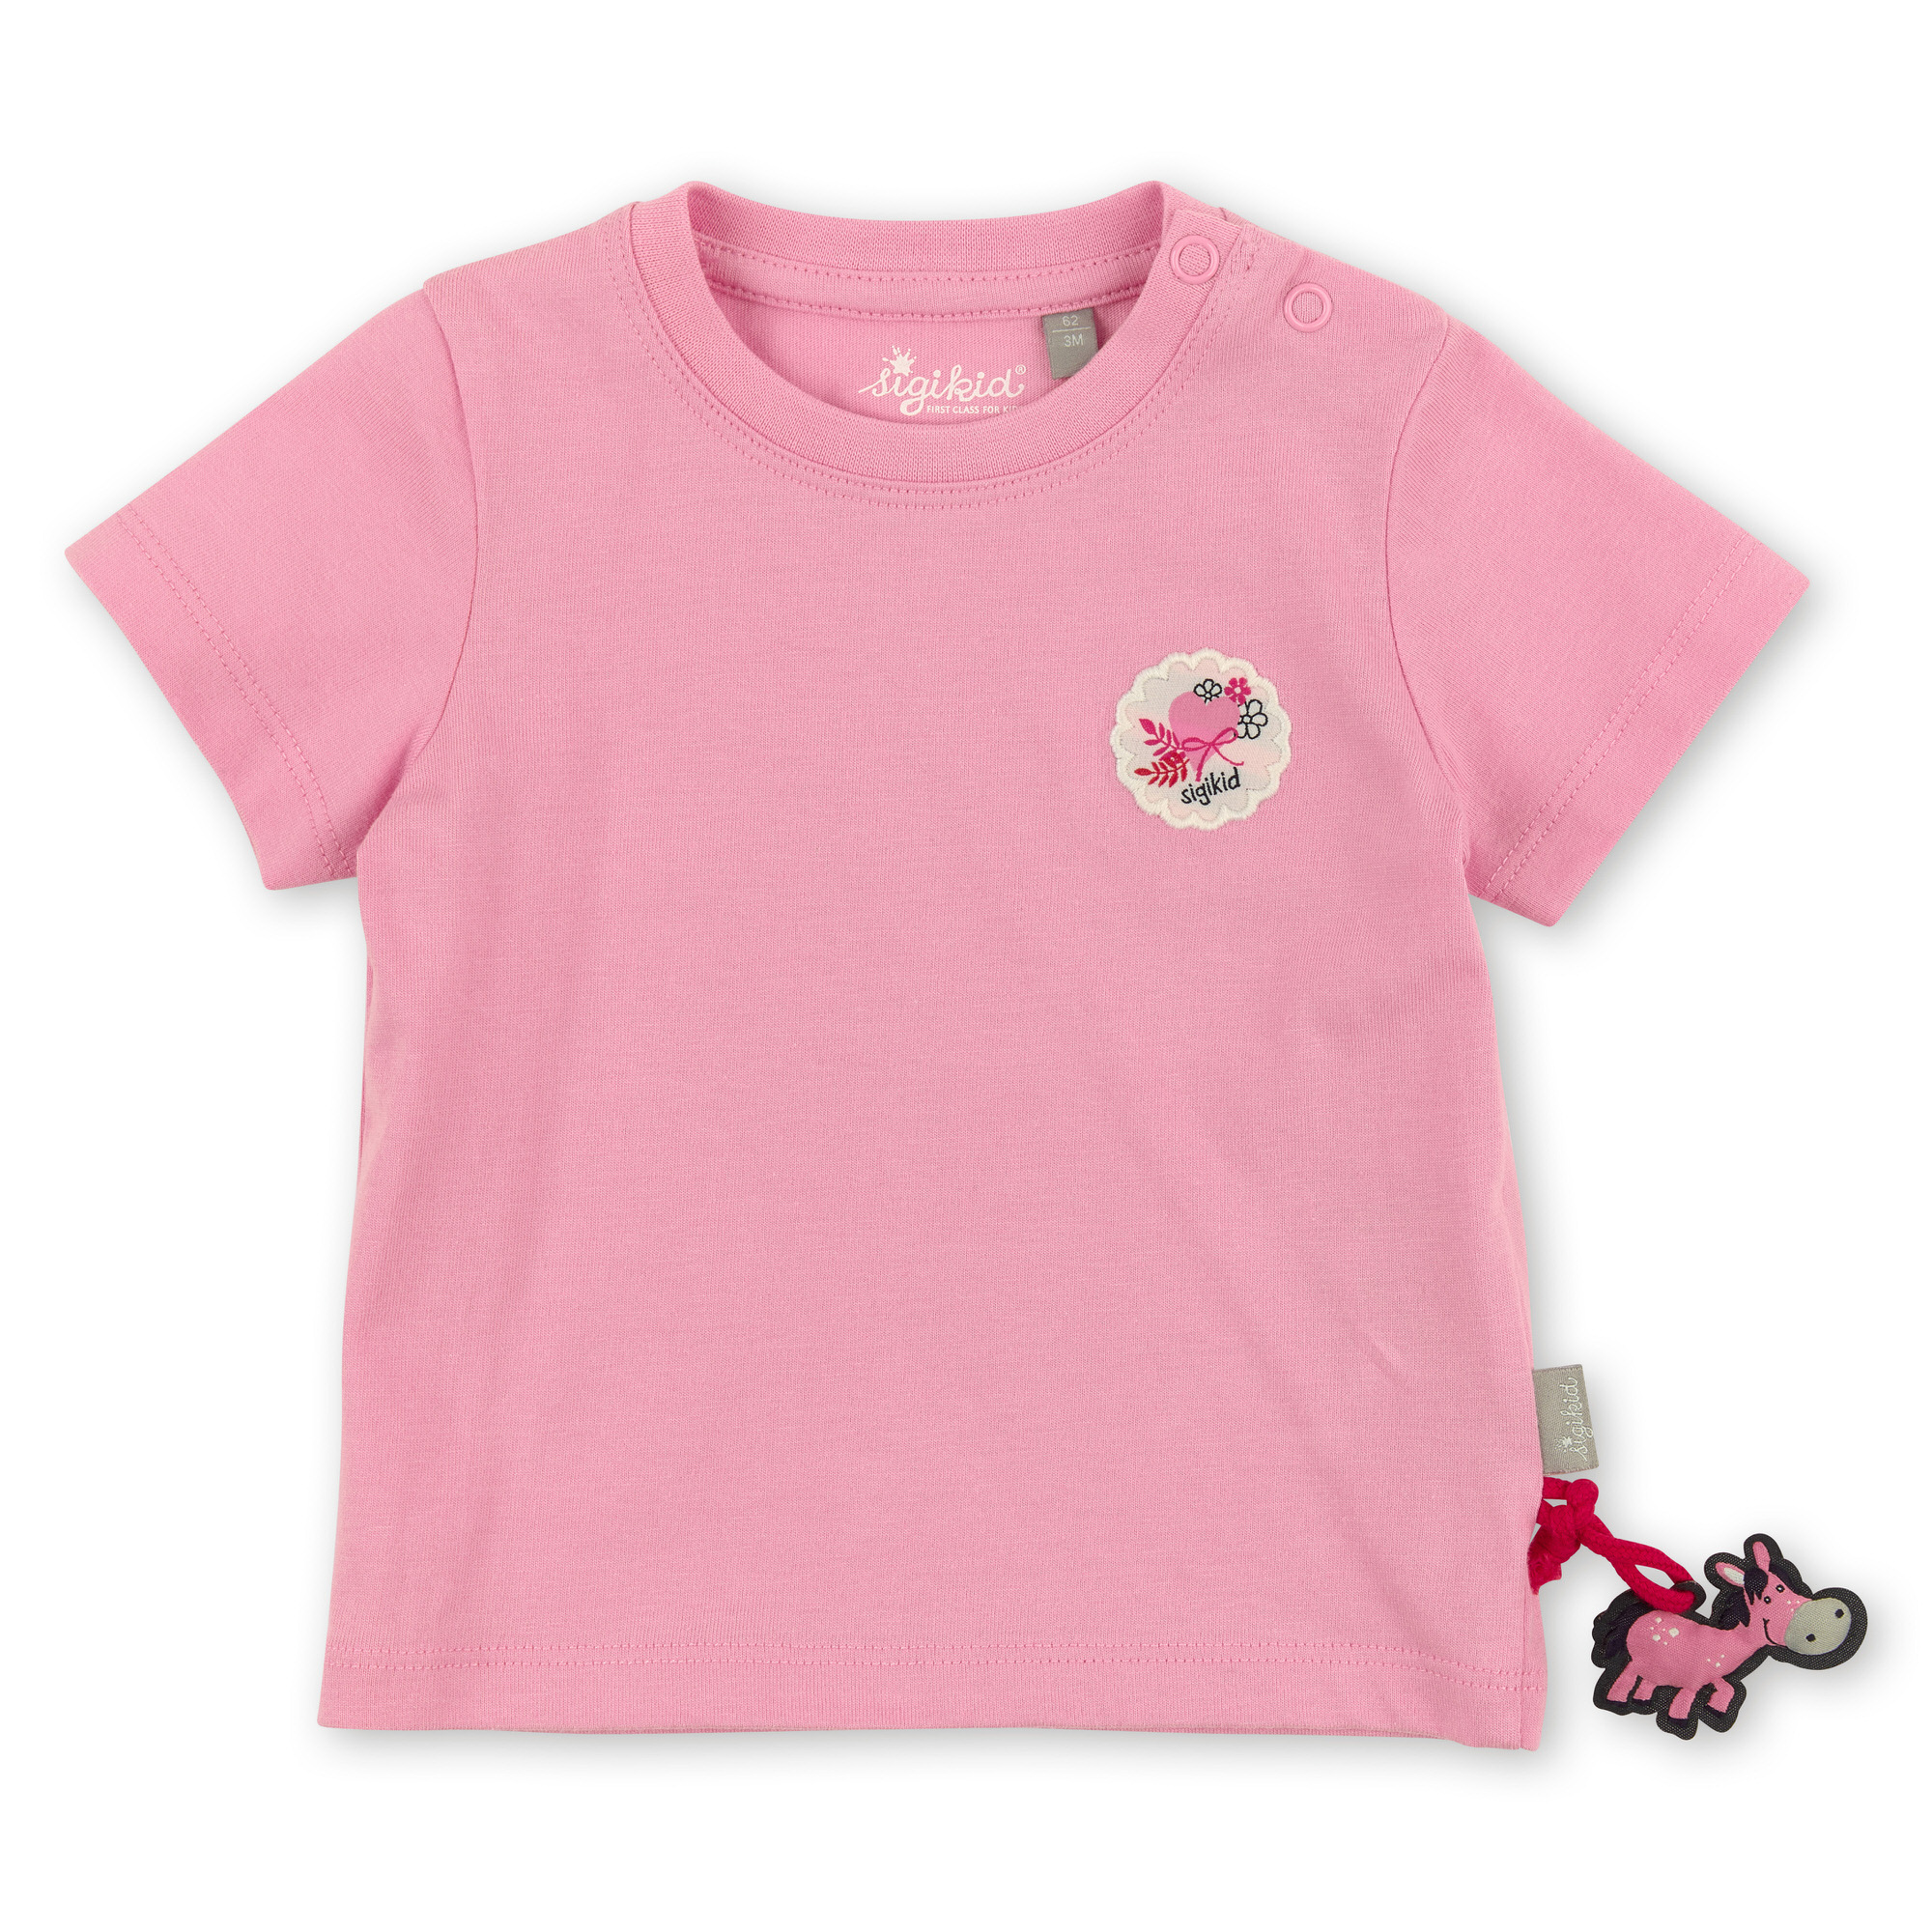 Pink Pony T-shirt for baby and toddler girls